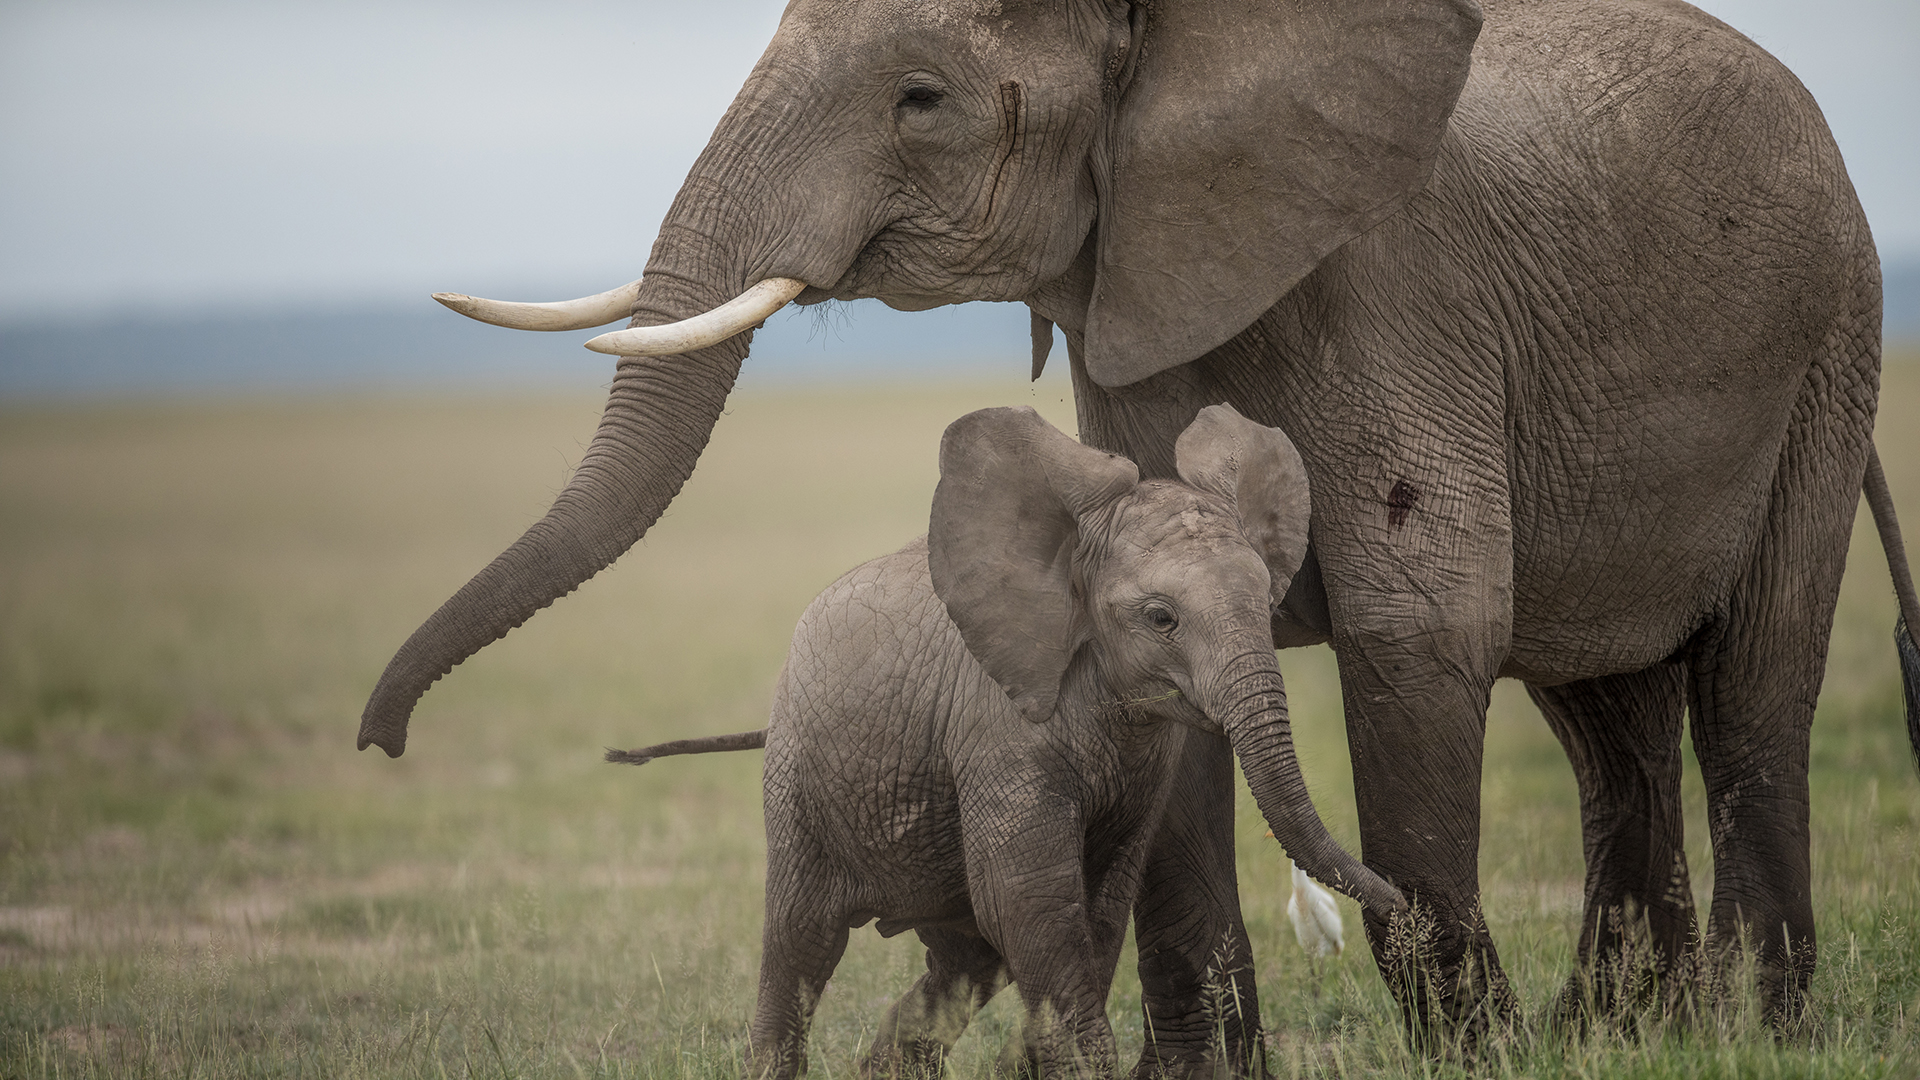 An adult elephant and baby elephant stand together